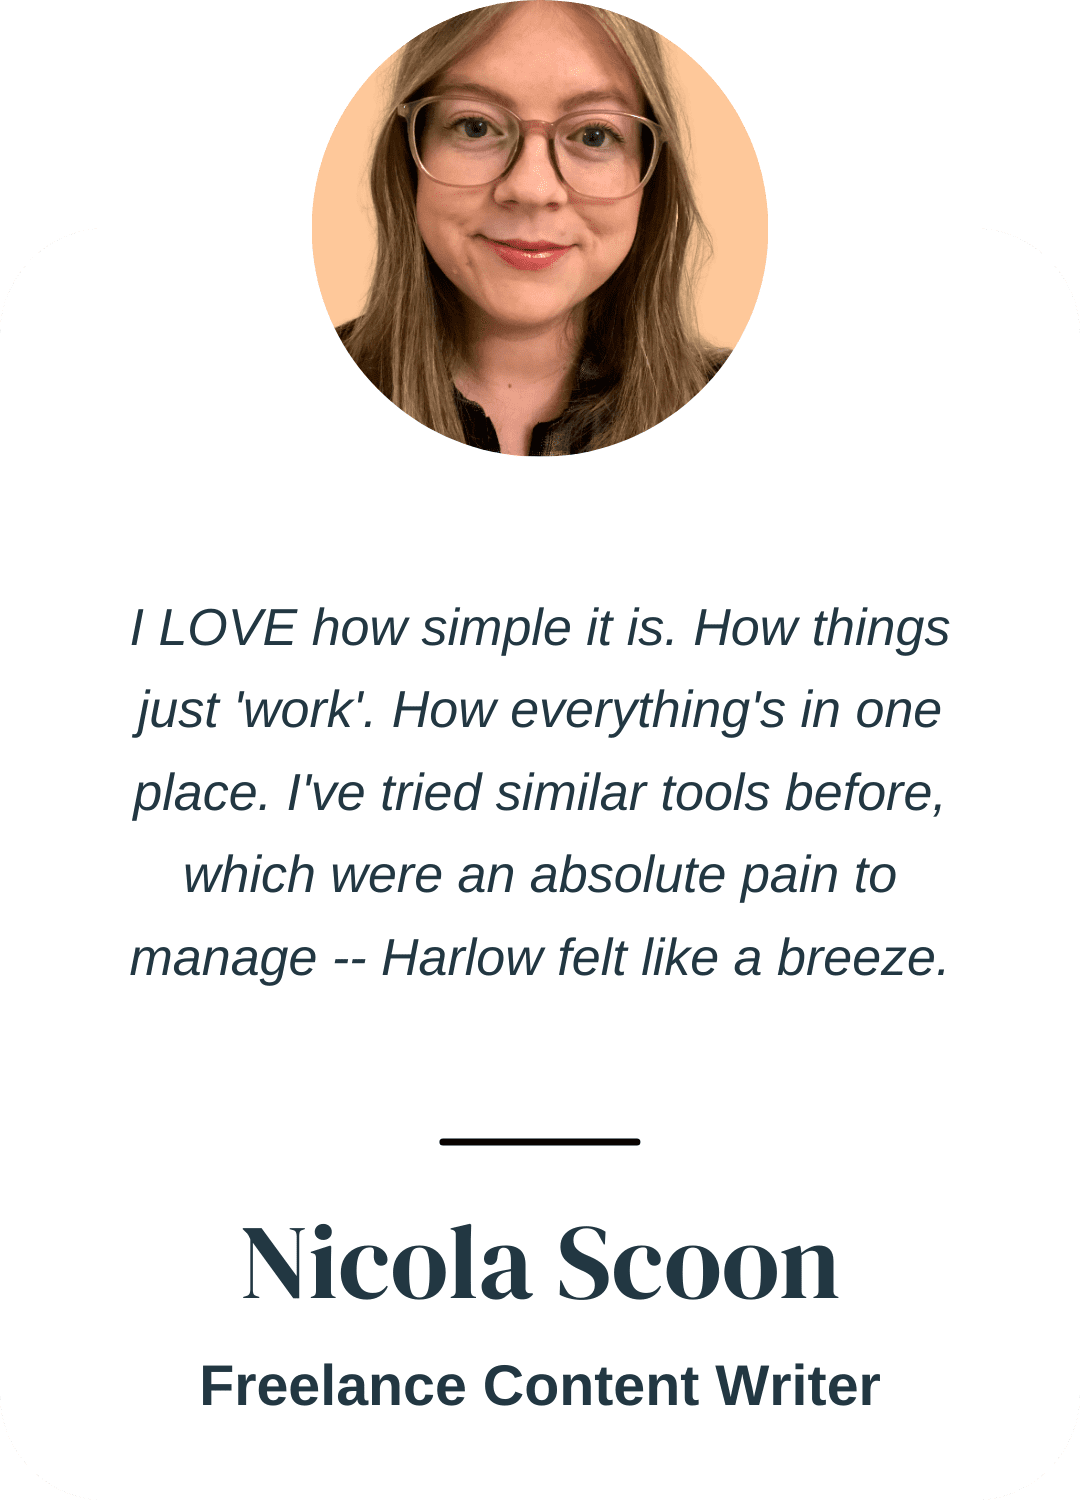 "I LOVE how simple it is. How things just 'work'. How everything's in one place. I've tried similar tools before, which were an absolute pain to manage -- Harlow felt like a breeze." Nicola Scoon, Freelance Content Writer